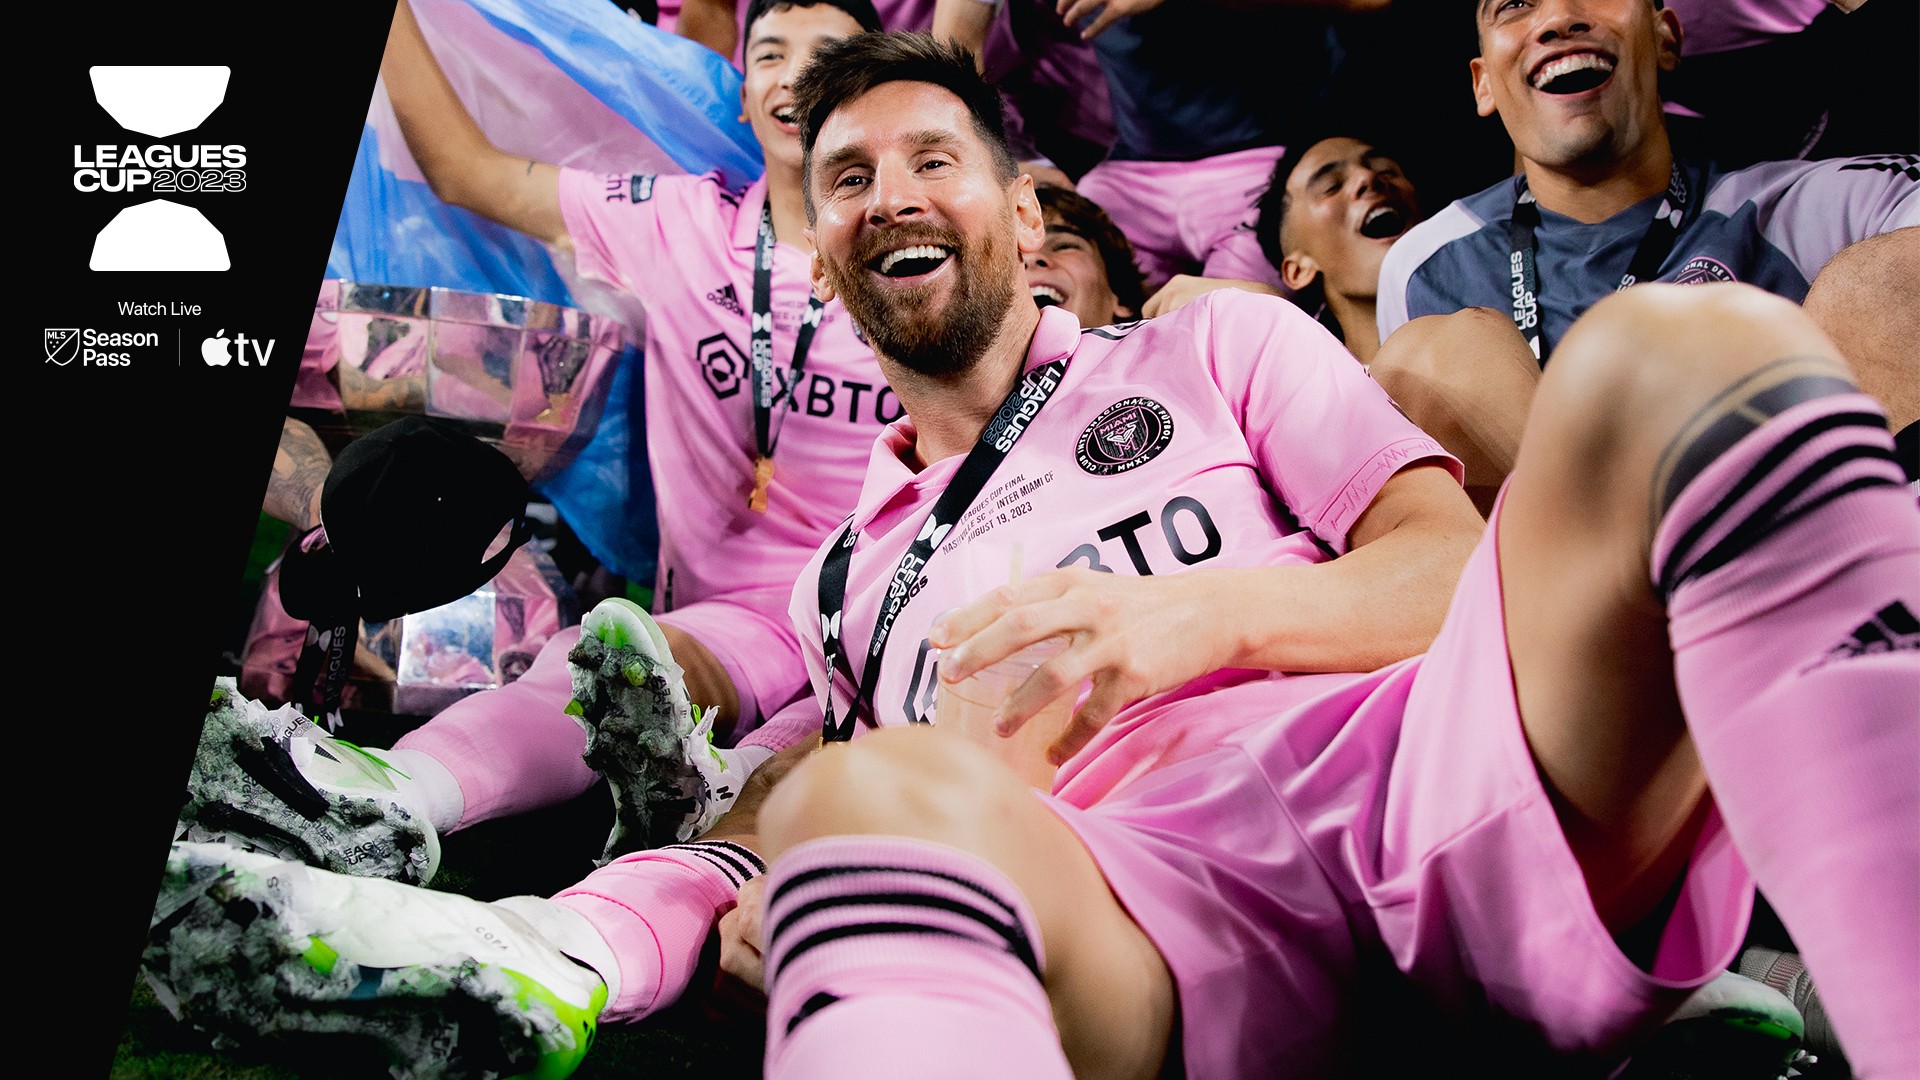 Lionel Messi sets world record as Inter Miami win Leagues Cup | MLSSoccer.com